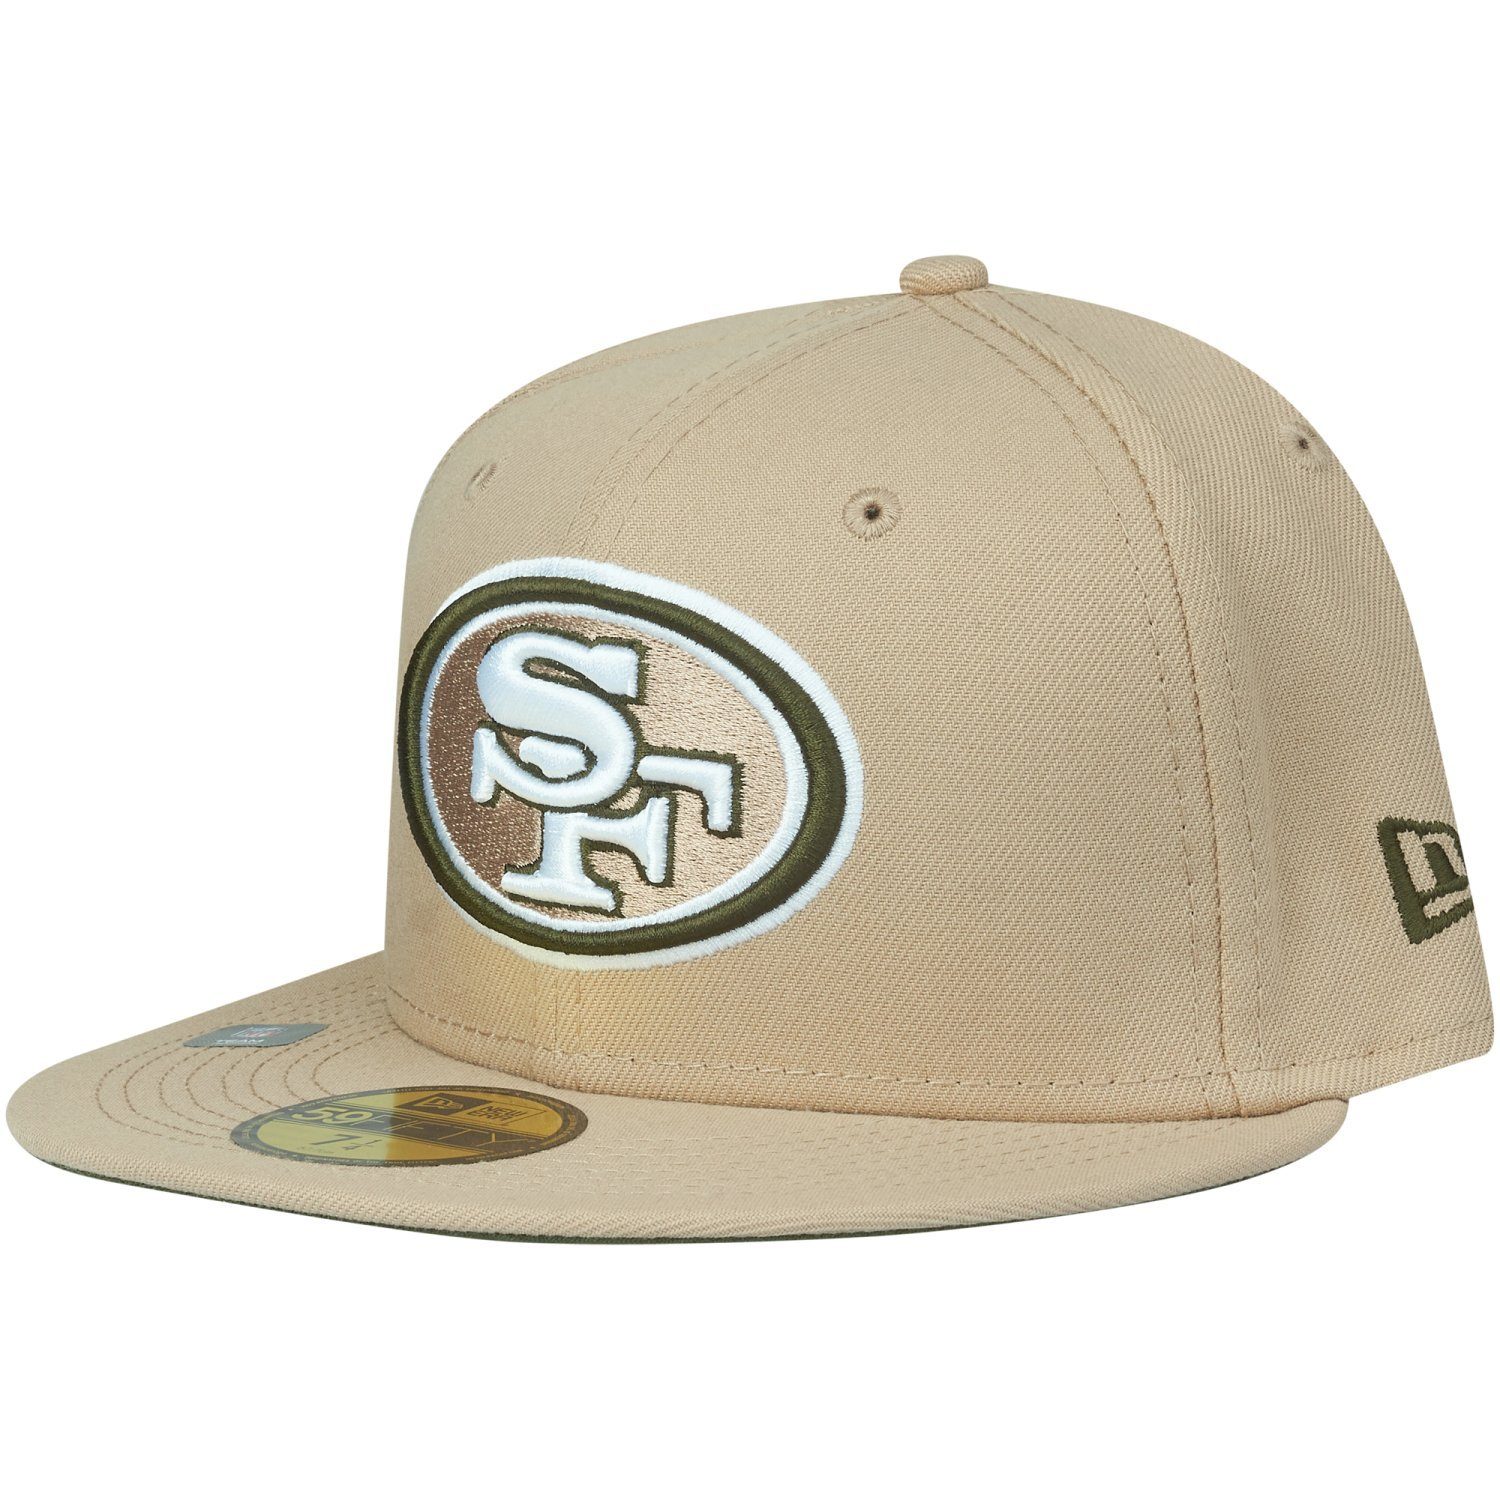 ANNIVERSARY Fitted San Era 49ers New 59Fifty Cap NFL Francisco Teams